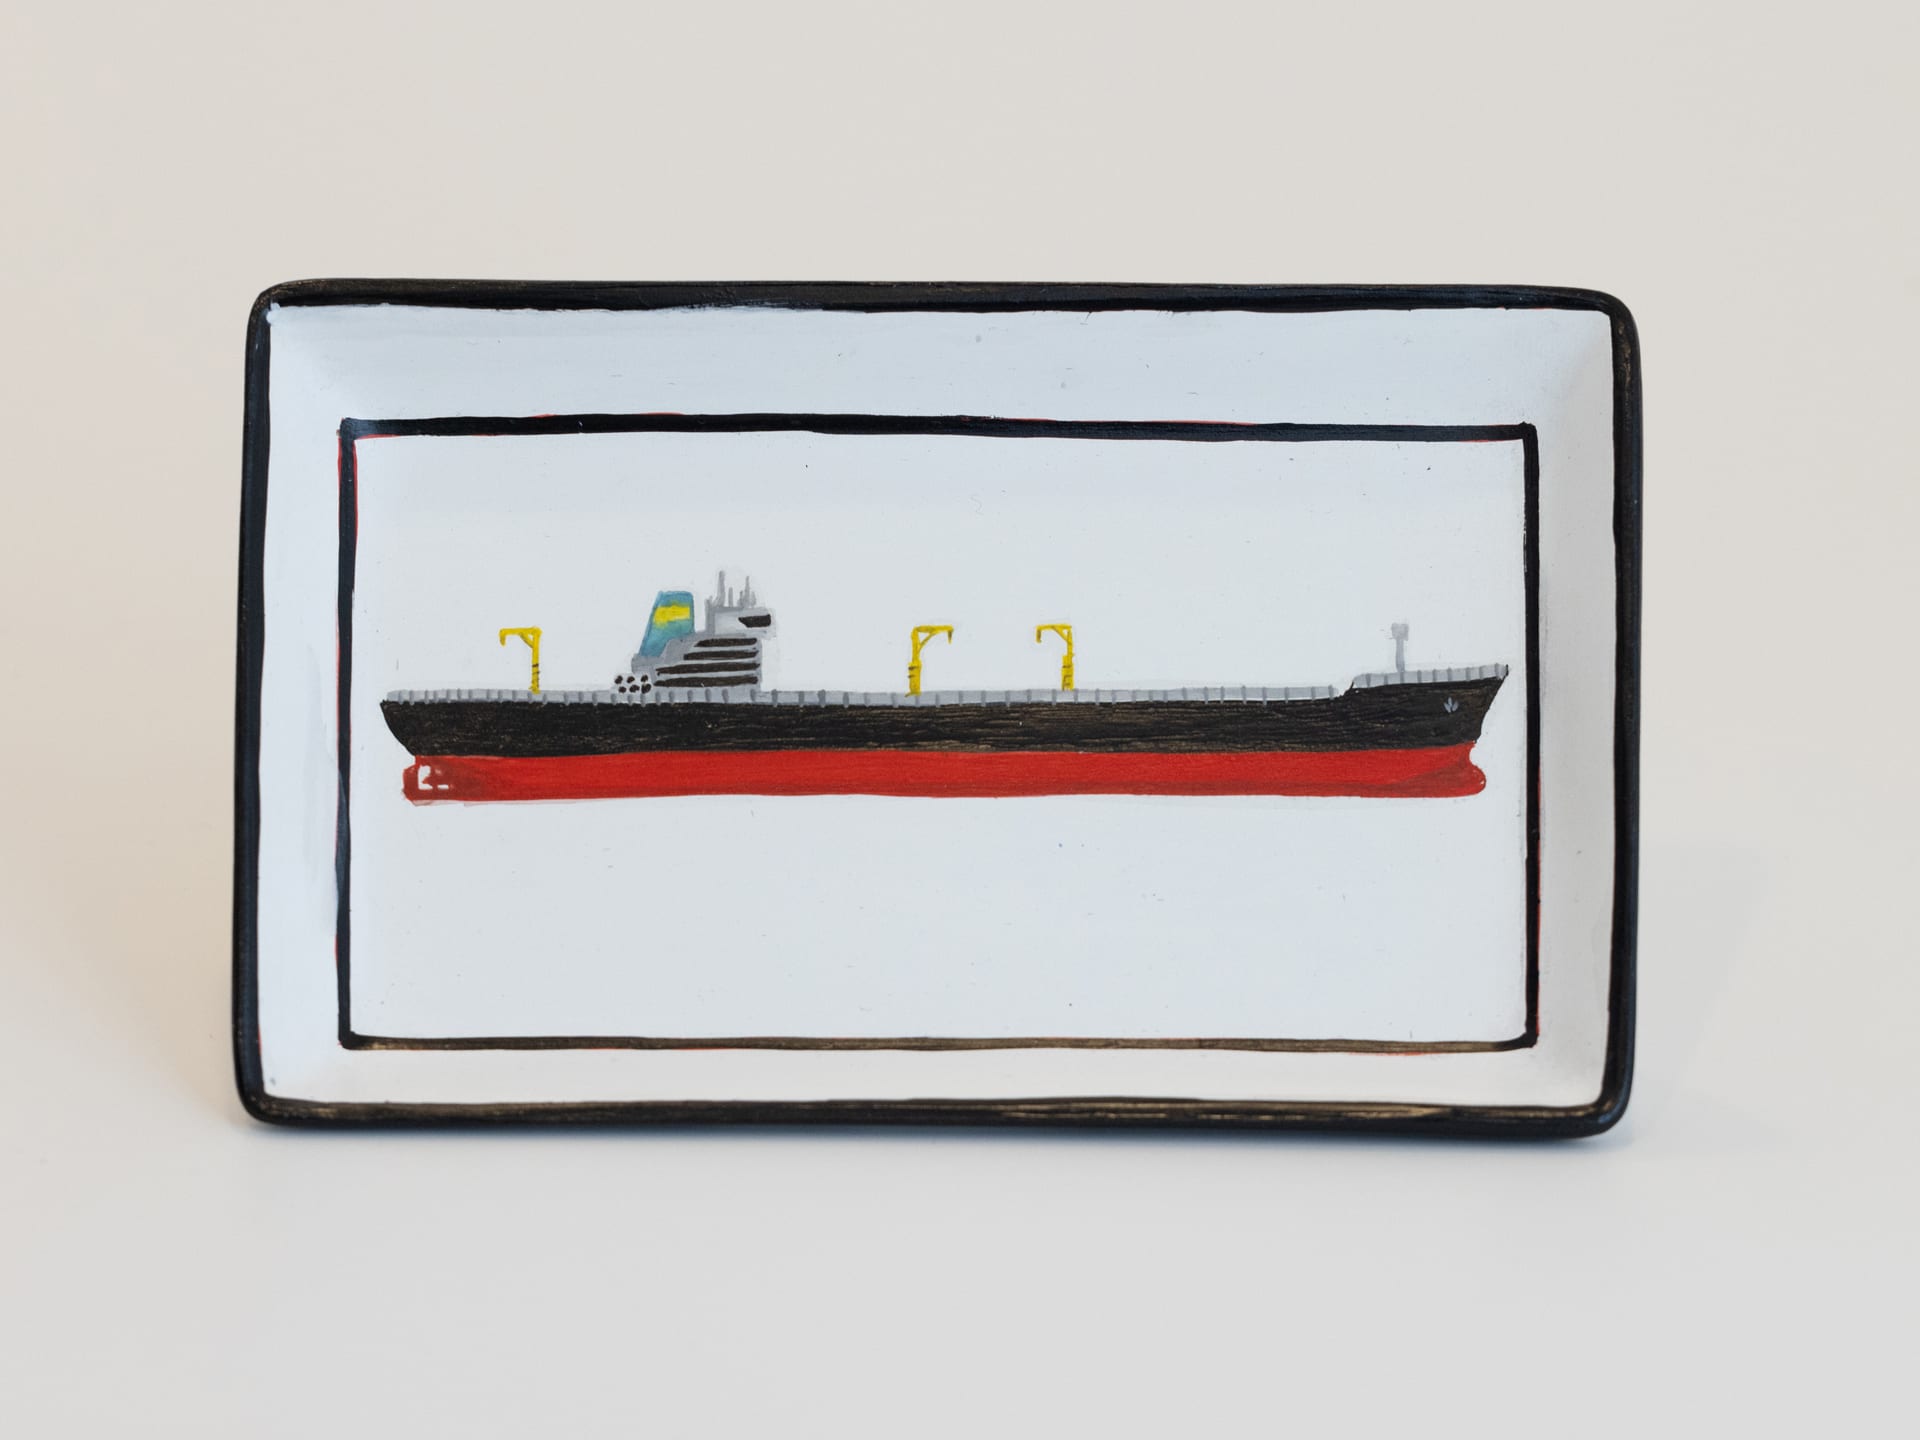 Ceramic Plate with a Depiction of a Tanker Ship